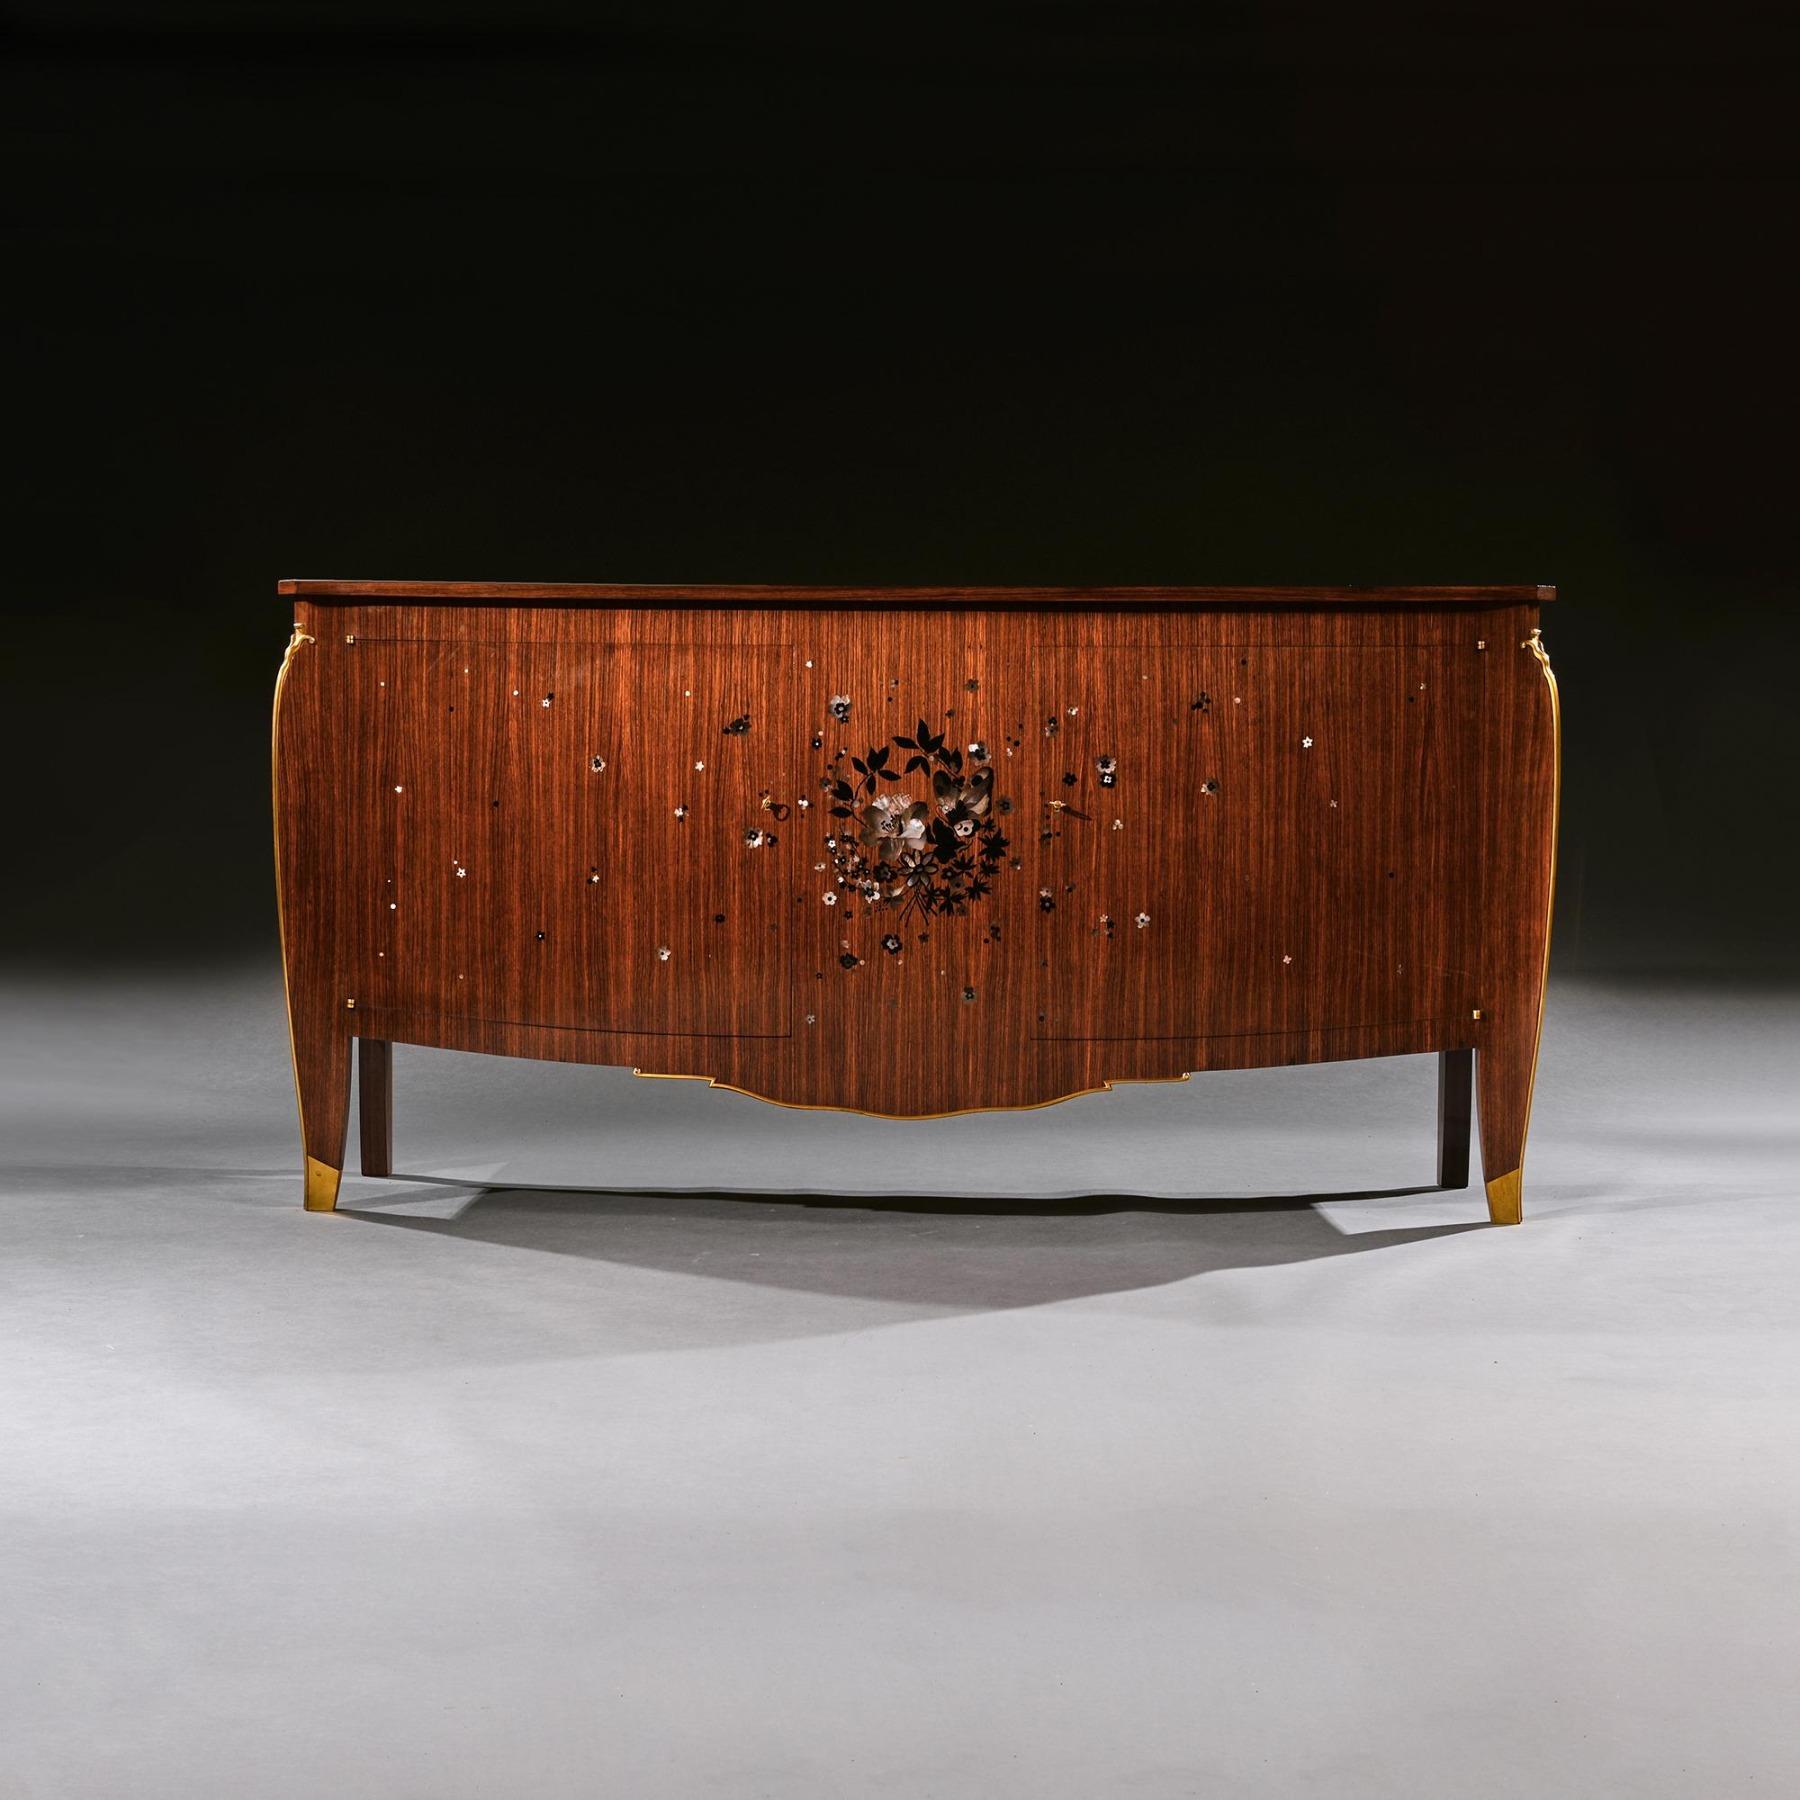 A rare Art Deco commode / sideboard by Jules Leleu in palisander wood with ebony and mother of pearl inlaid marquetry and bronze mounts, by Jules Leleu (1883-1961) model number 2873.

French - Paris, circa 1939.

A masterpiece of design and